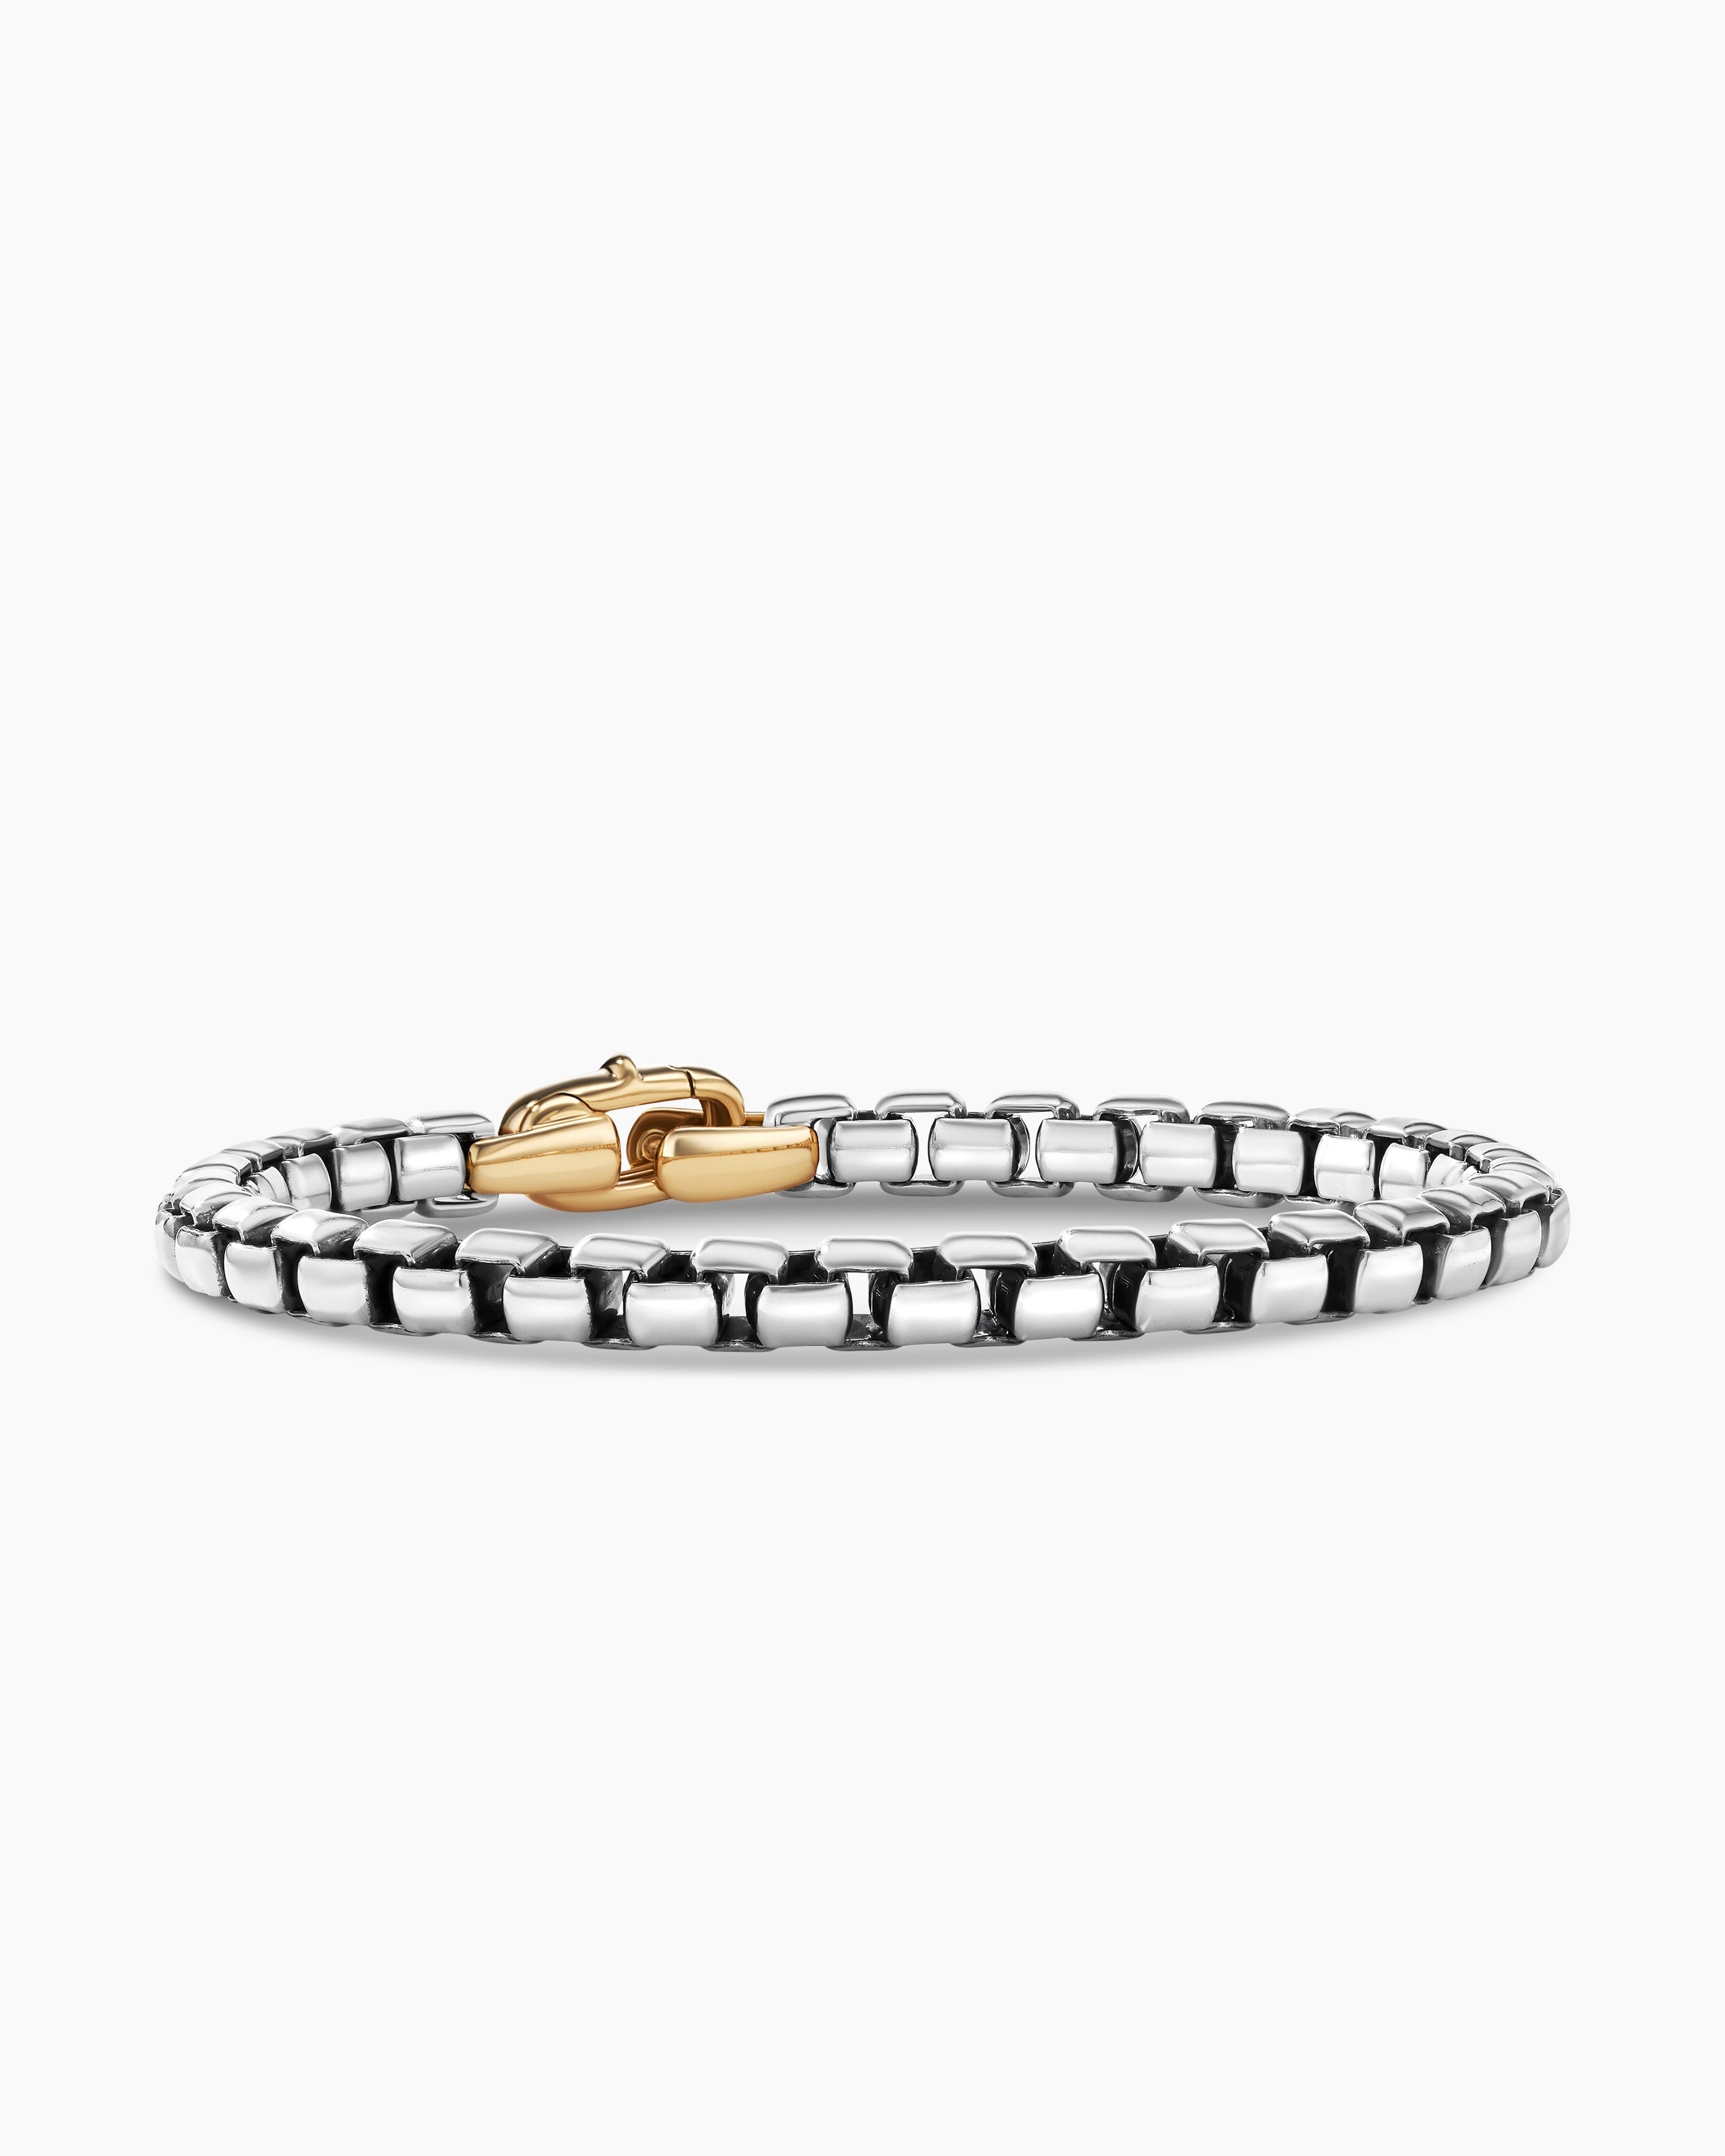 DY Bel Aire Box Chain Bracelet in Sterling Silver with 14K Yellow Gold, 6mm  | David Yurman